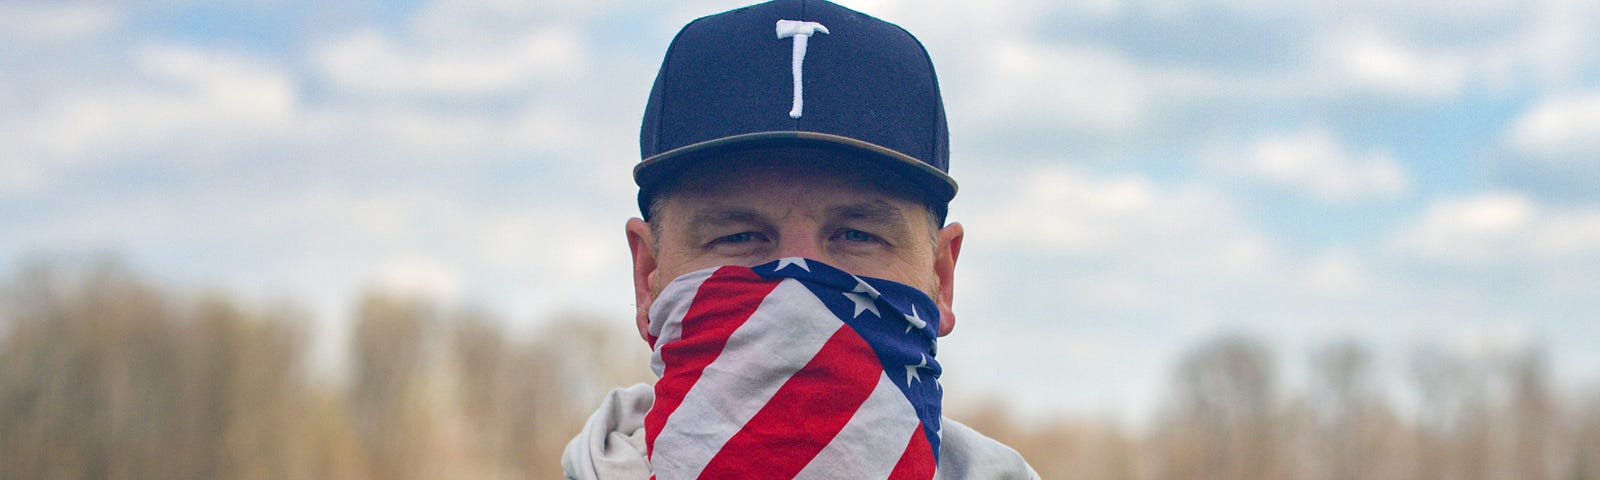 man in black hat with American flag bandana on face